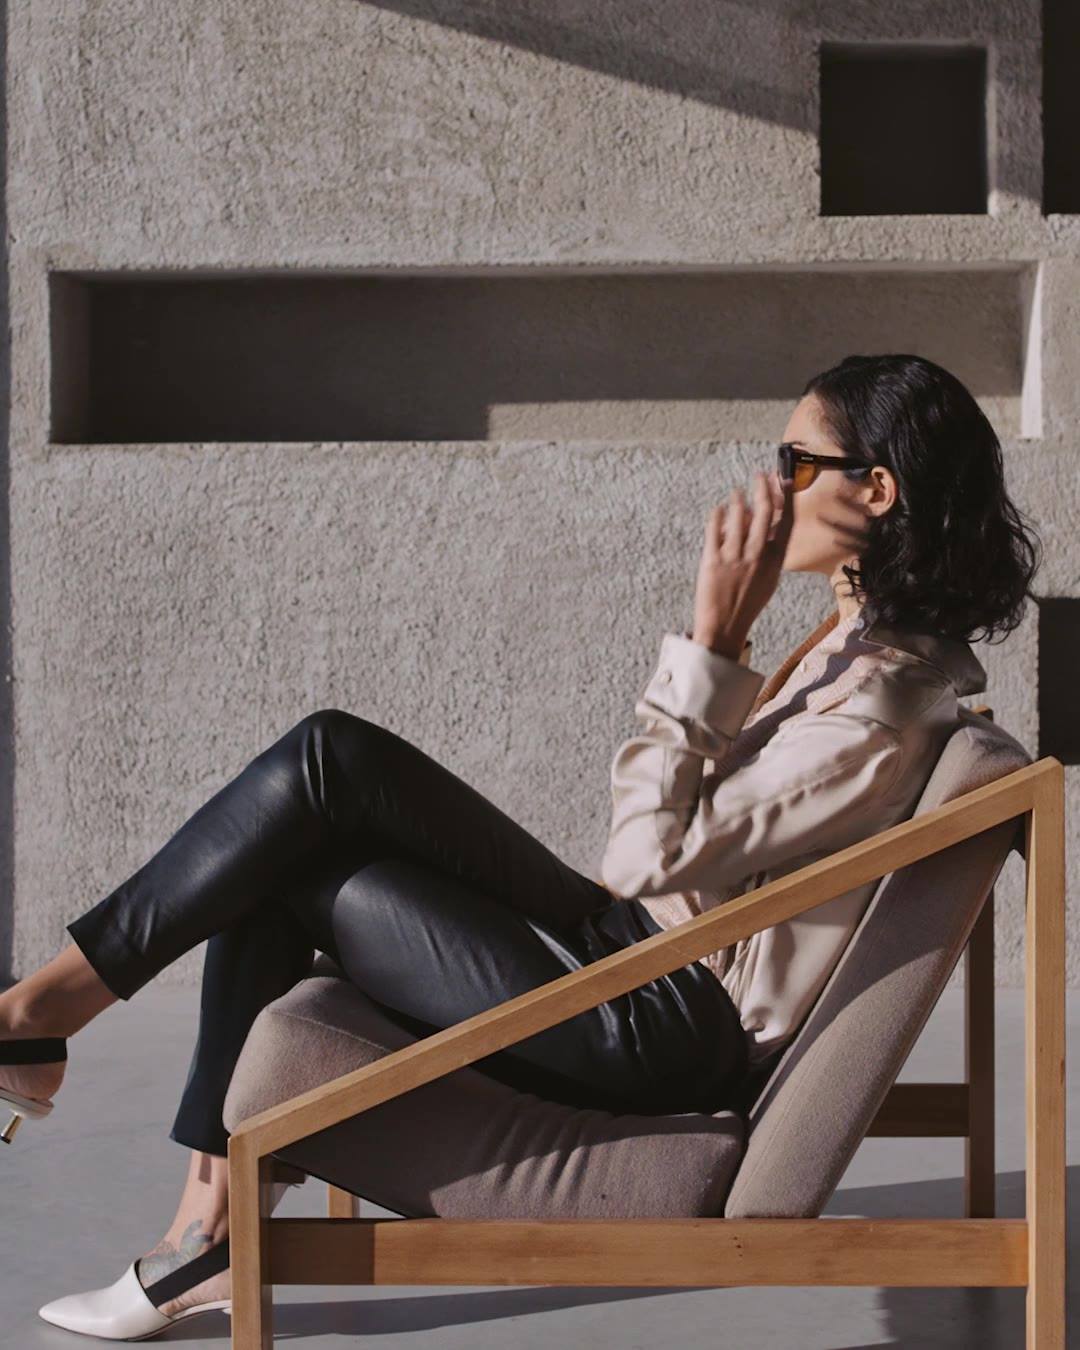 Watch our S/S 2020 Graphic By Nature collection come to artful life in this short film by Errol Rainey, featuring timeless pieces that merge quality with clean lines, conveying a sense of ease and elegance. 